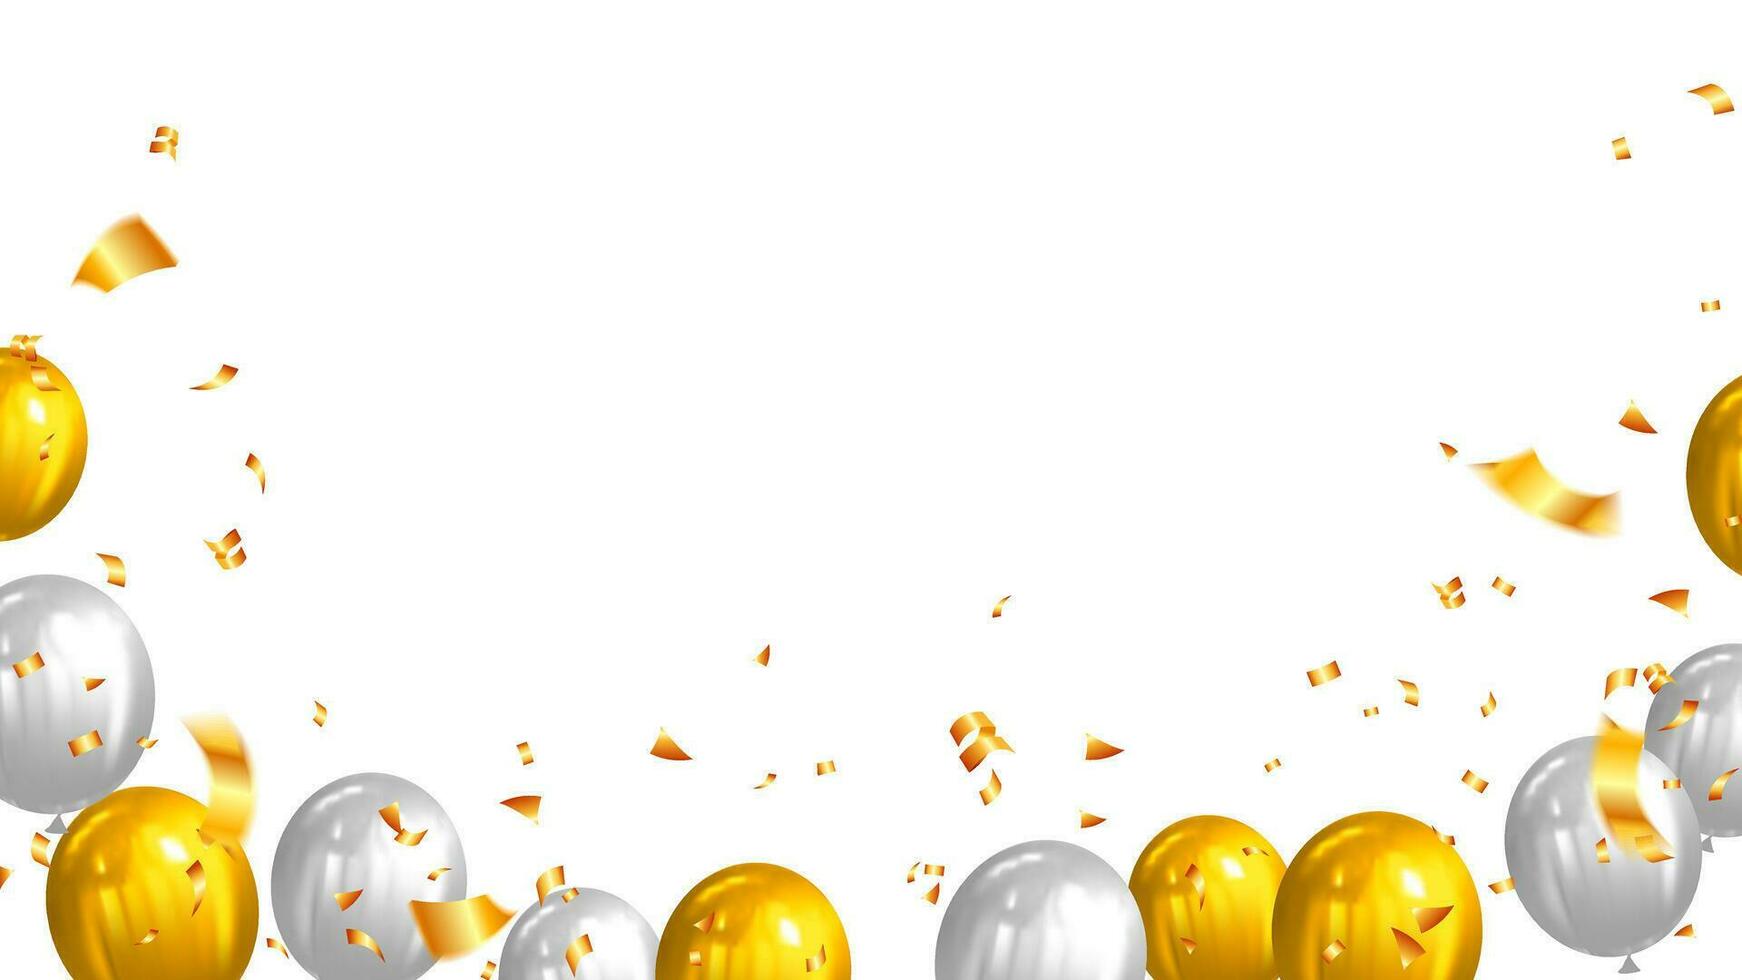 Celebration banner with gold and silver balloons vector